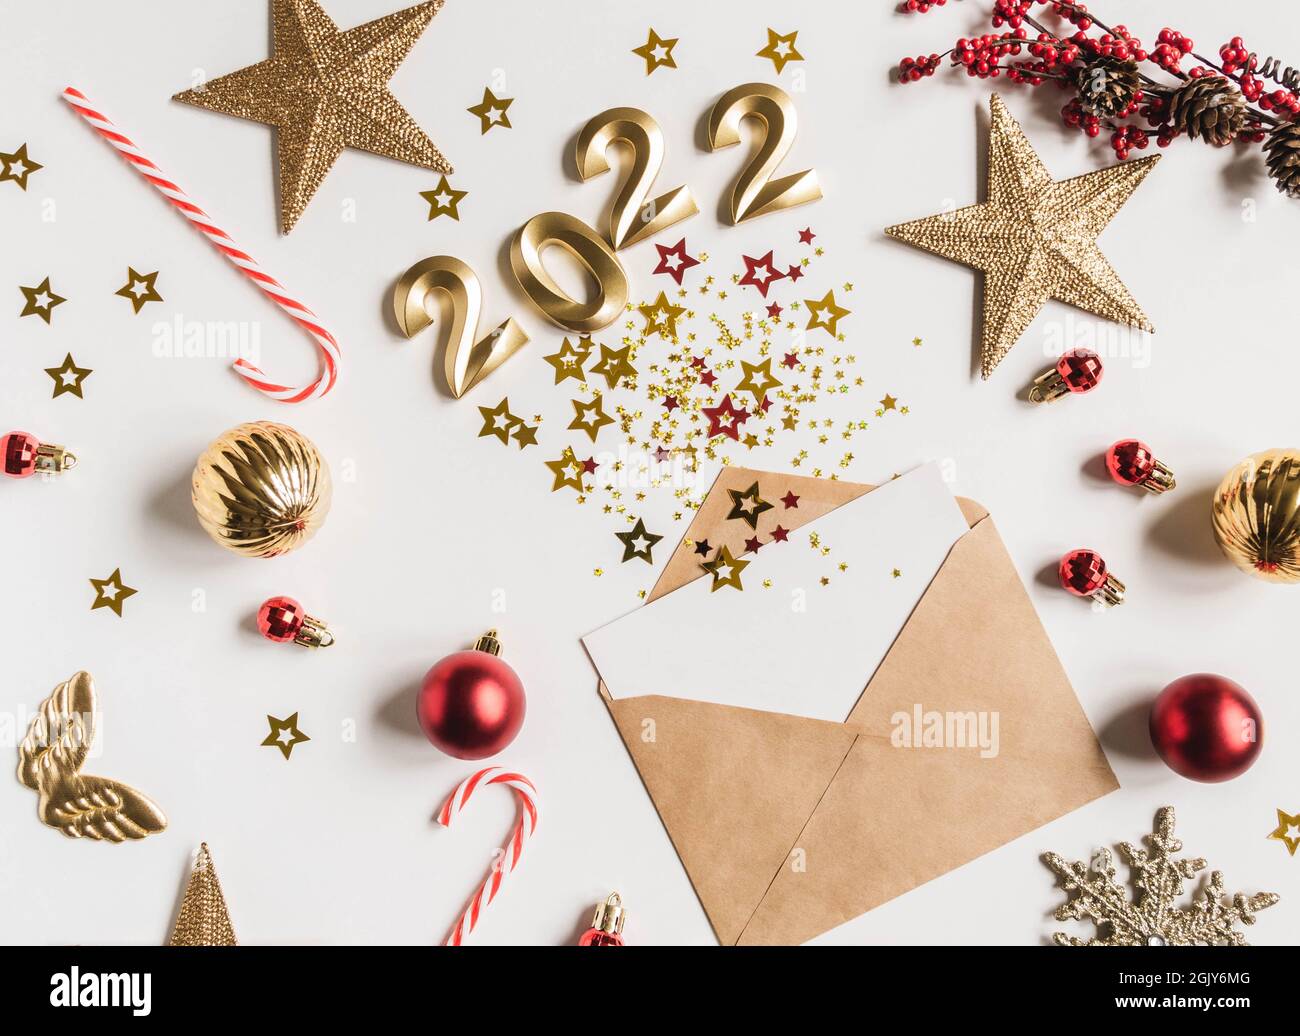 Open brown envelope with blank white card and various stars with the numbers of 2022 for the coming year imitation of explosion and festive seasonal d Stock Photo